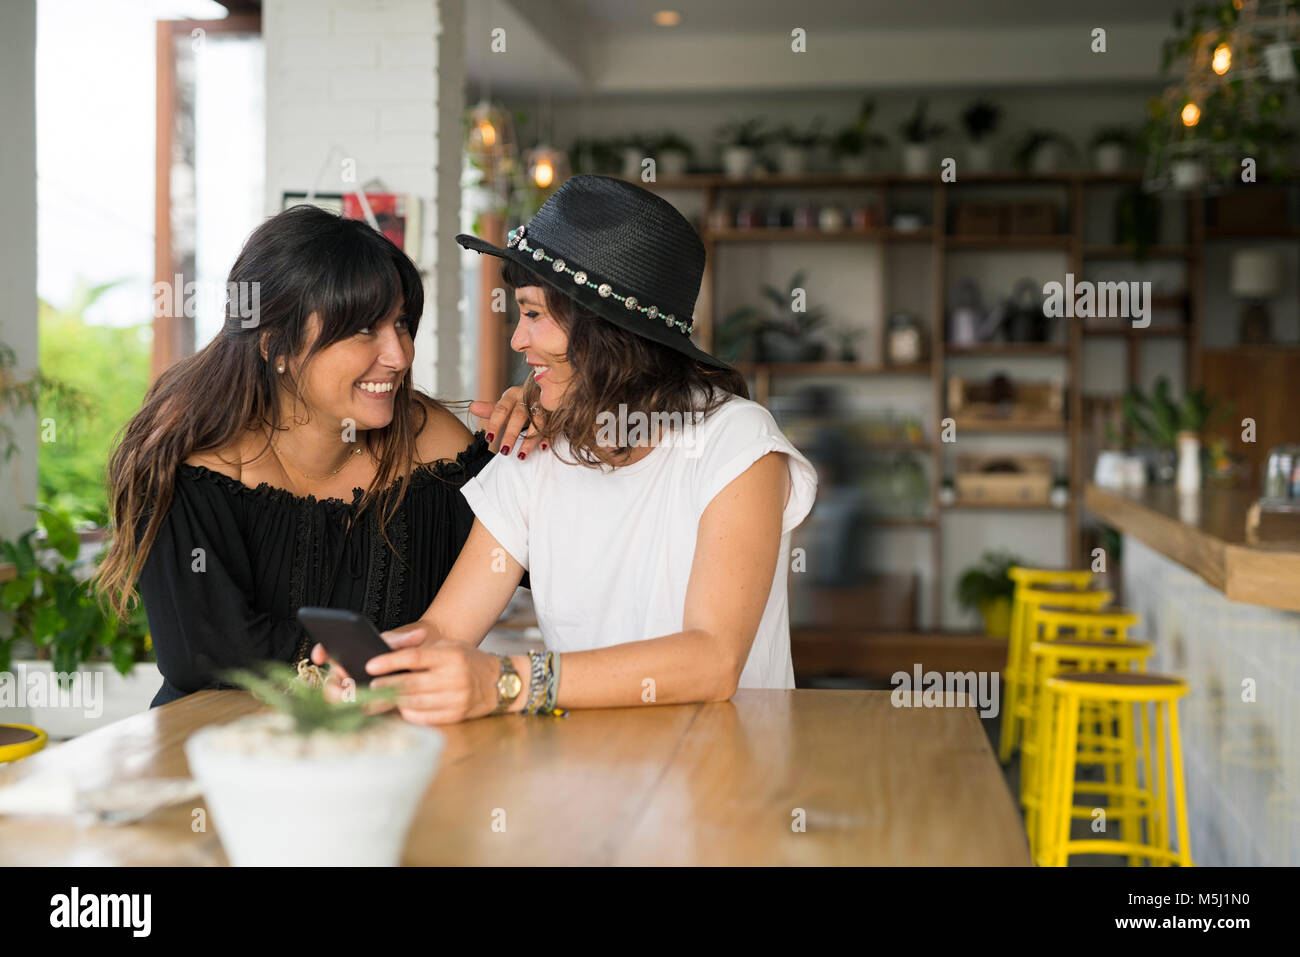 Deux femmes friends smiling at each other in cafe with smartphone Banque D'Images